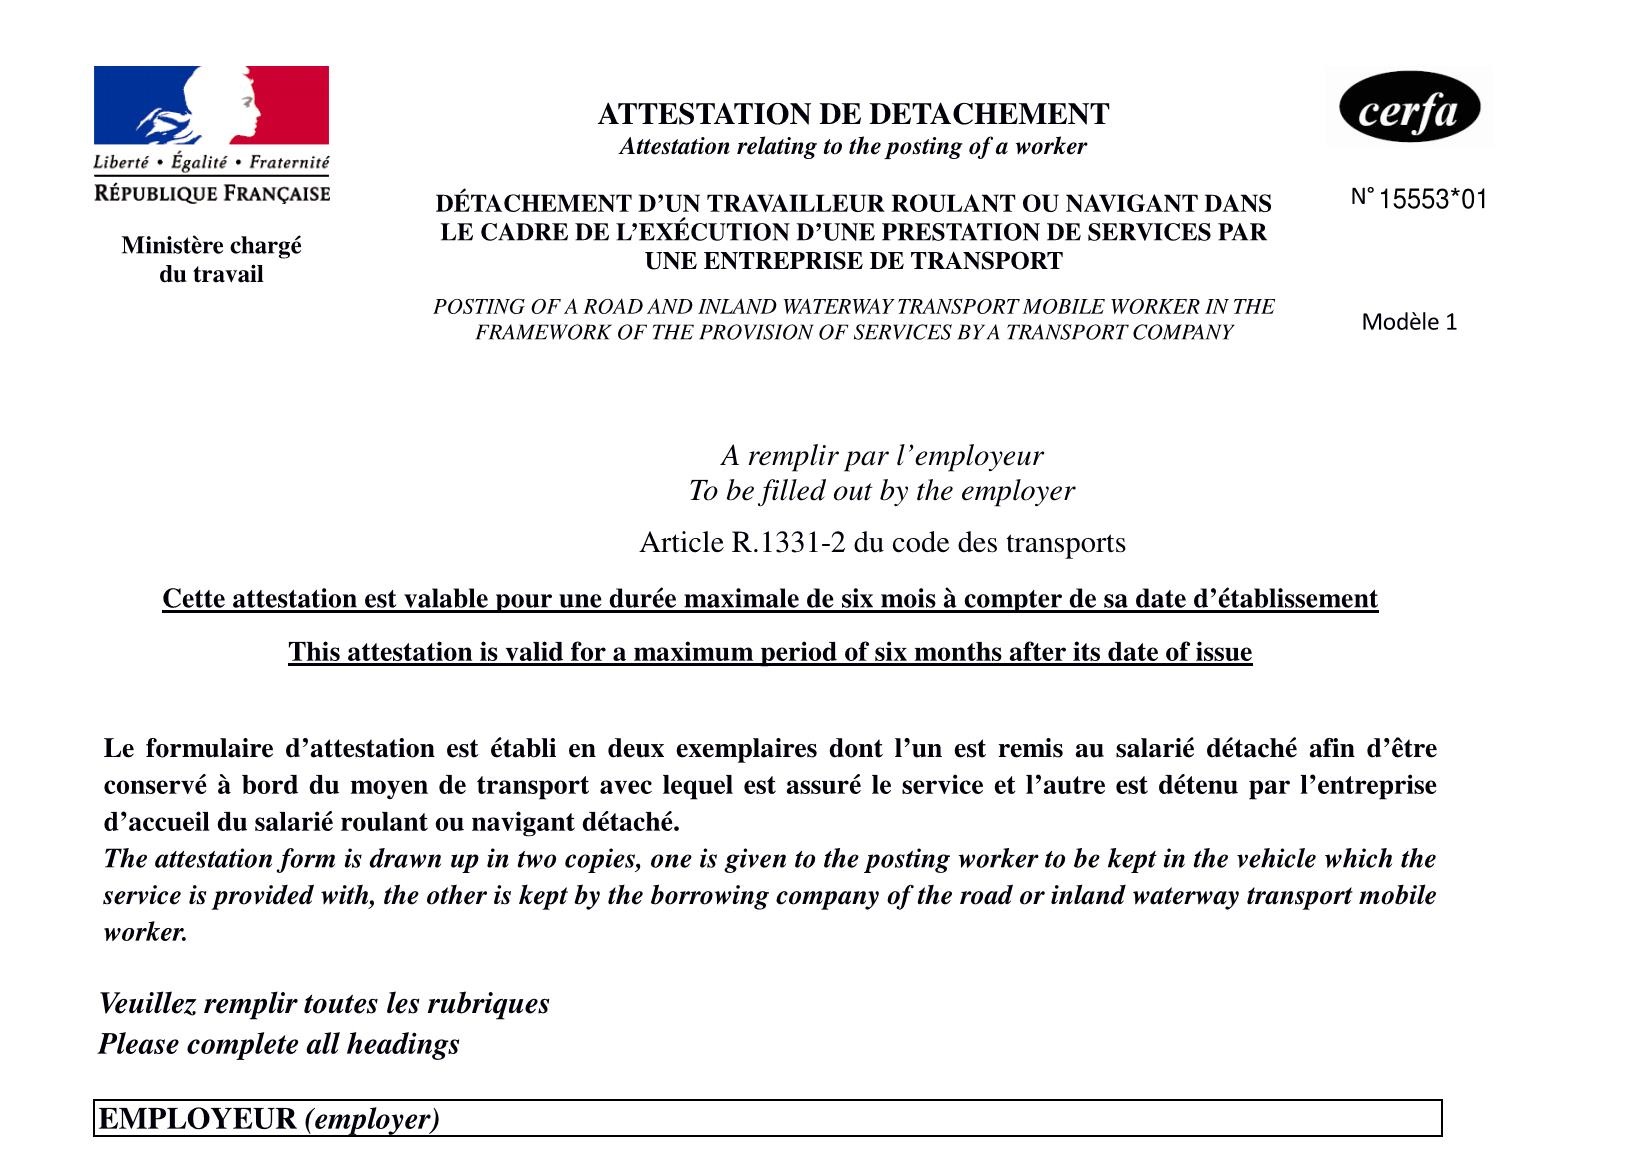 Certificate of secondment and representation in France